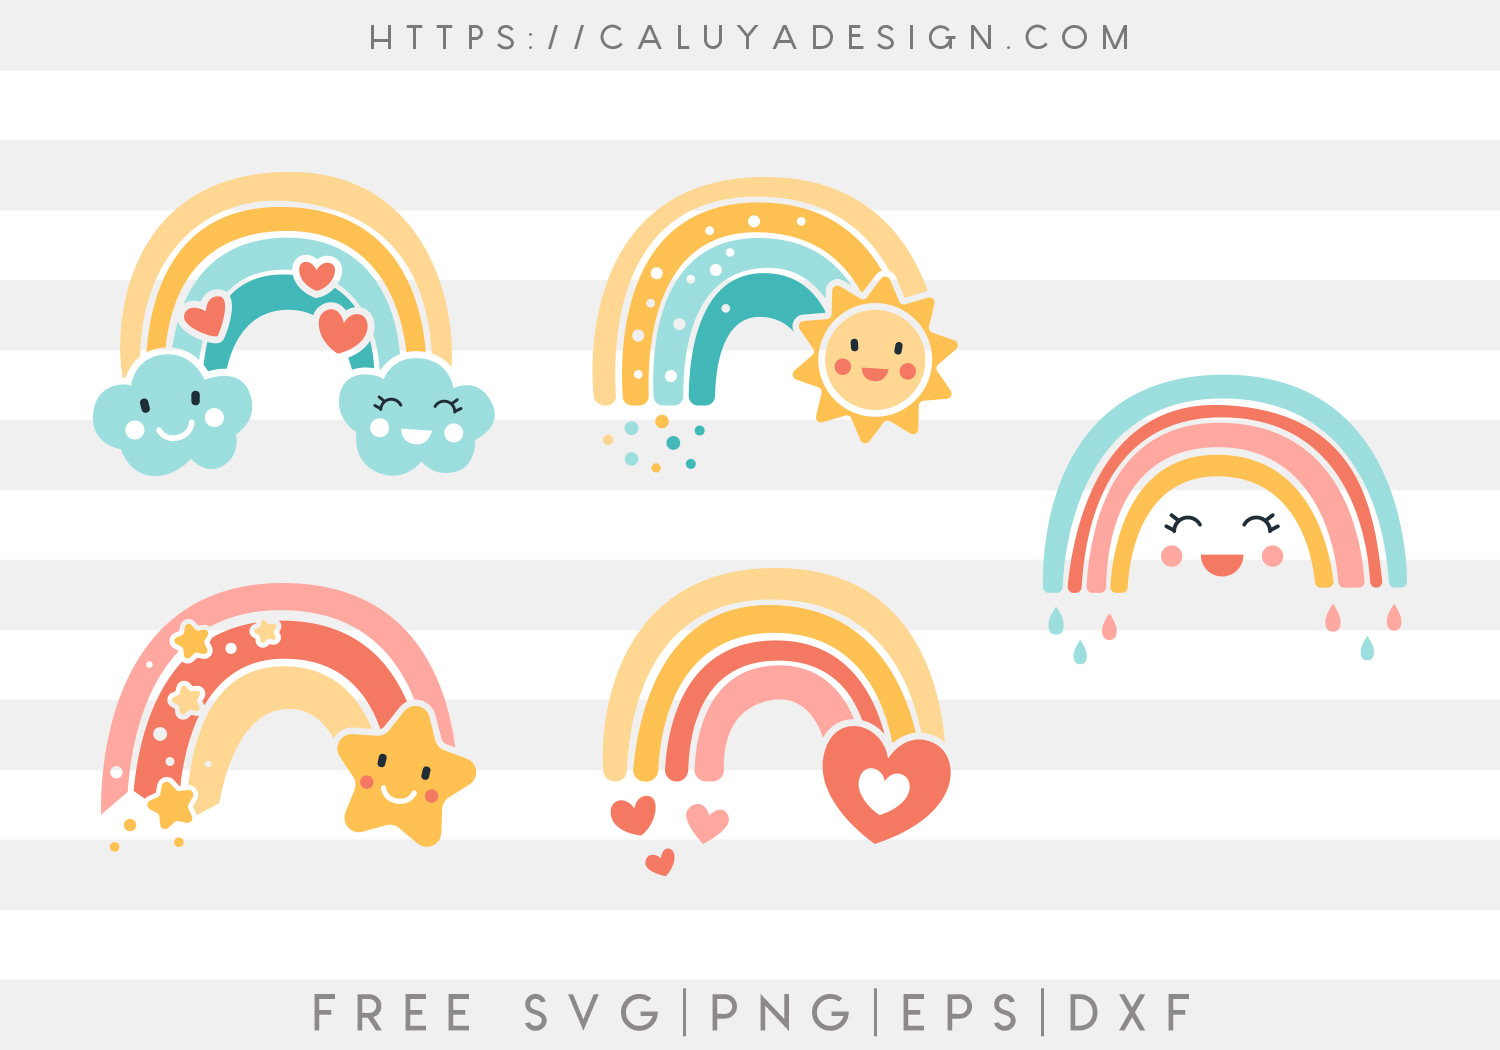 Rainbow SVG, PNG, EPS & DXF